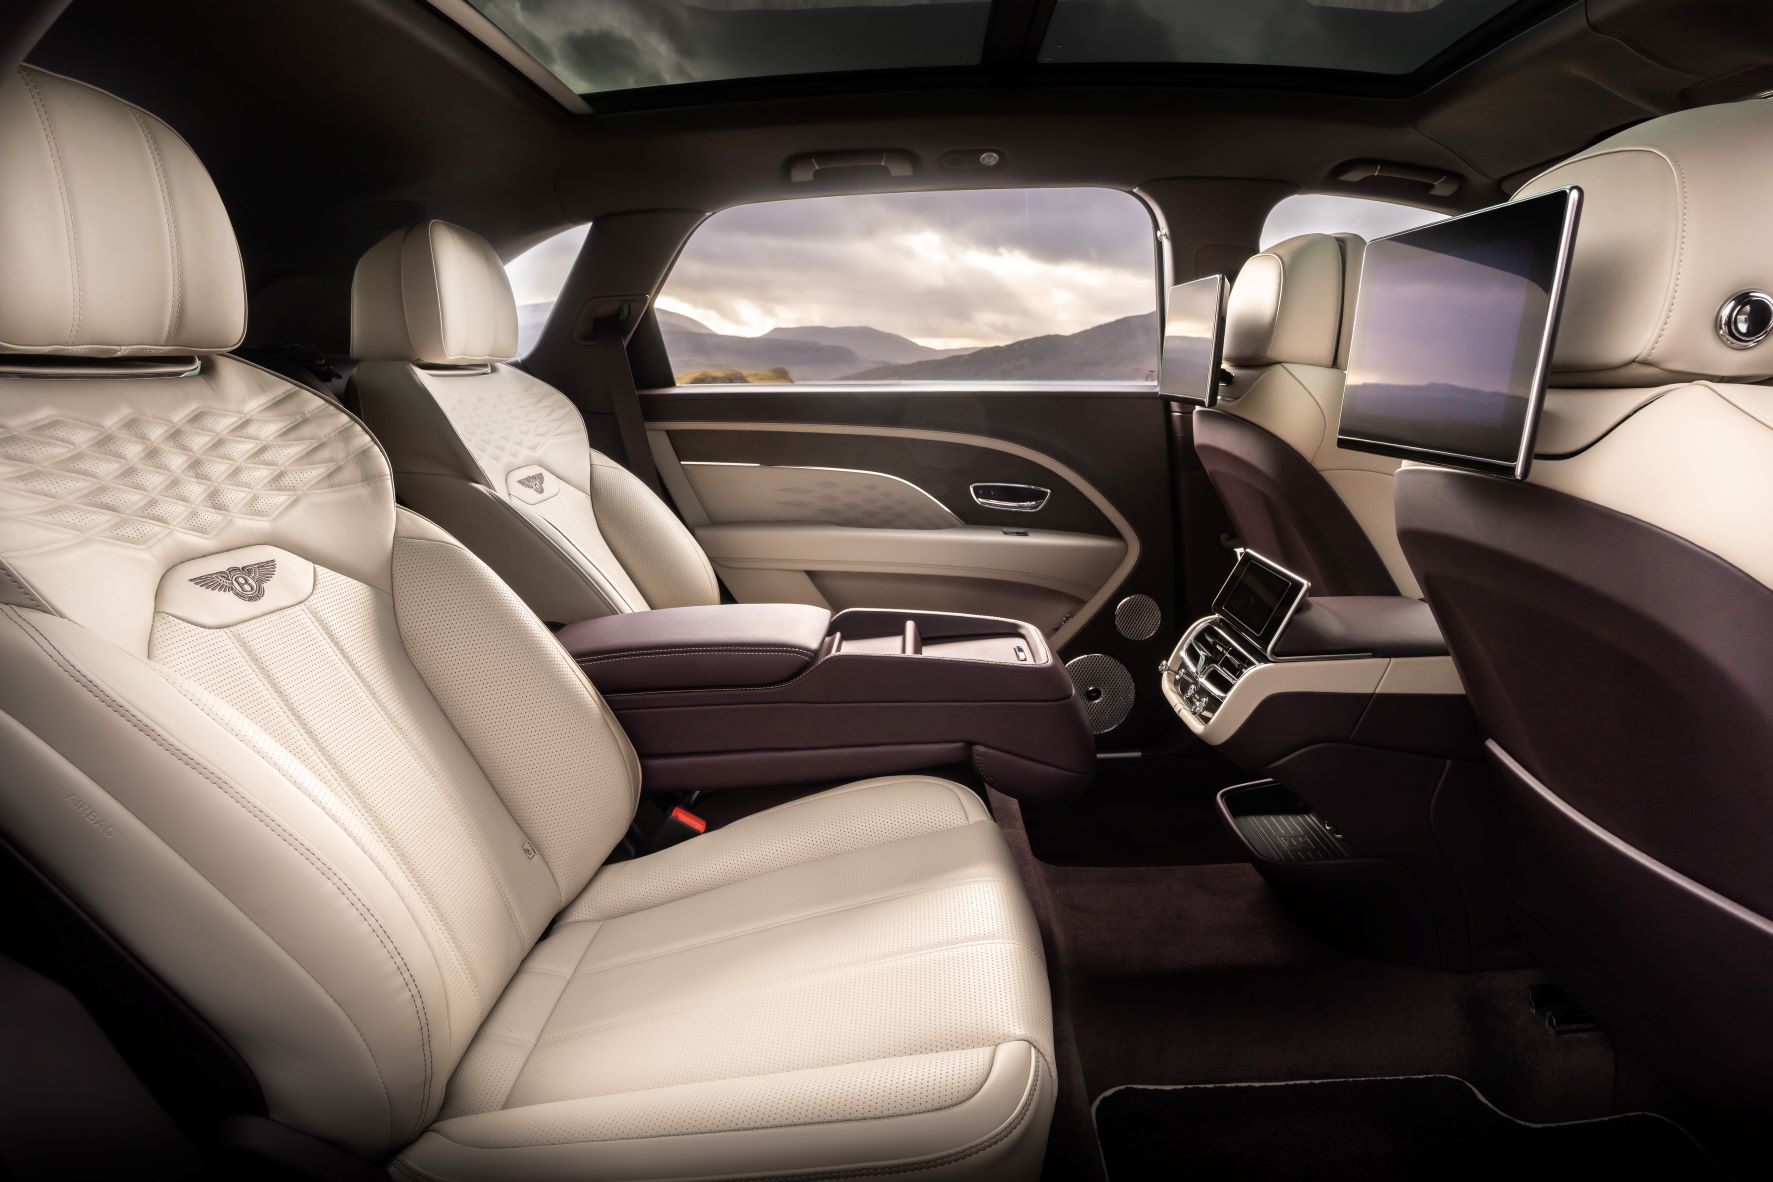 Picture of the rear seats on the new Bentley Bentayga extended wheelbase